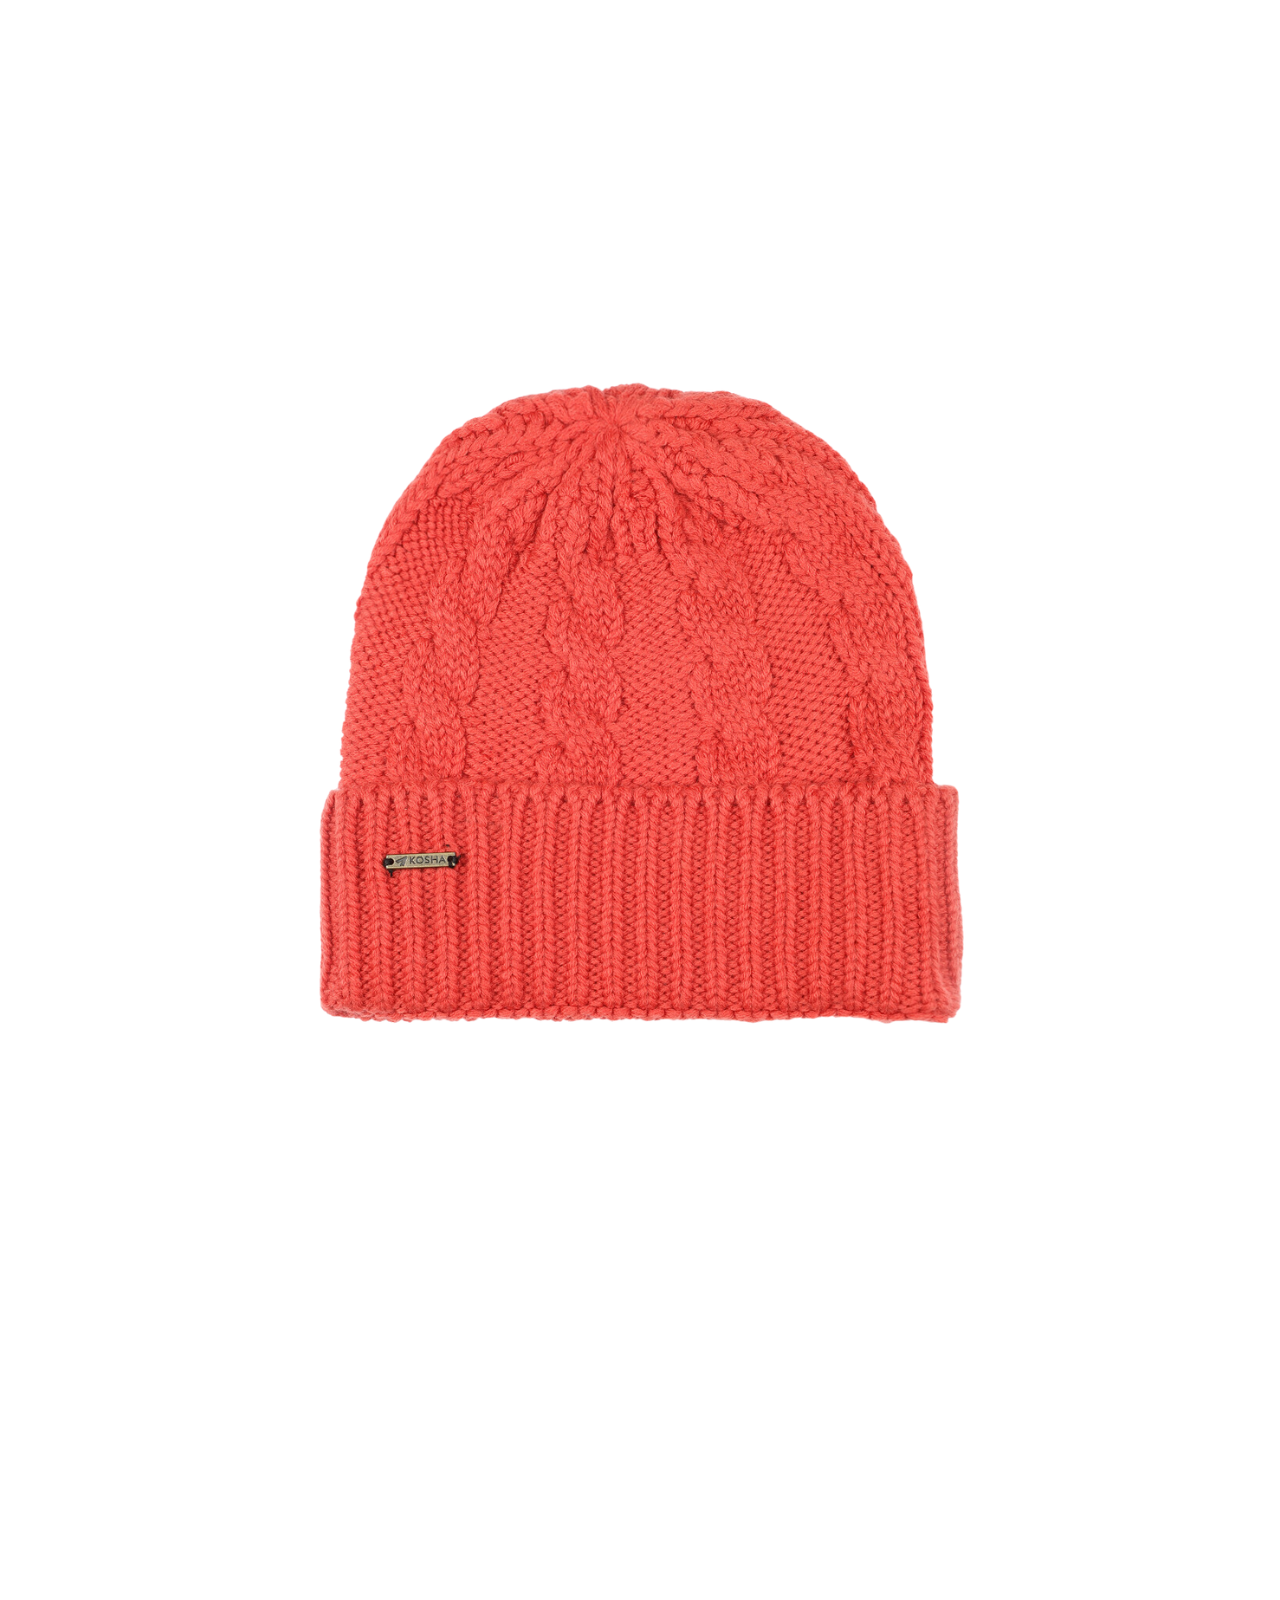 Acrylic Wool Cable Knit Winter Beanie For Women